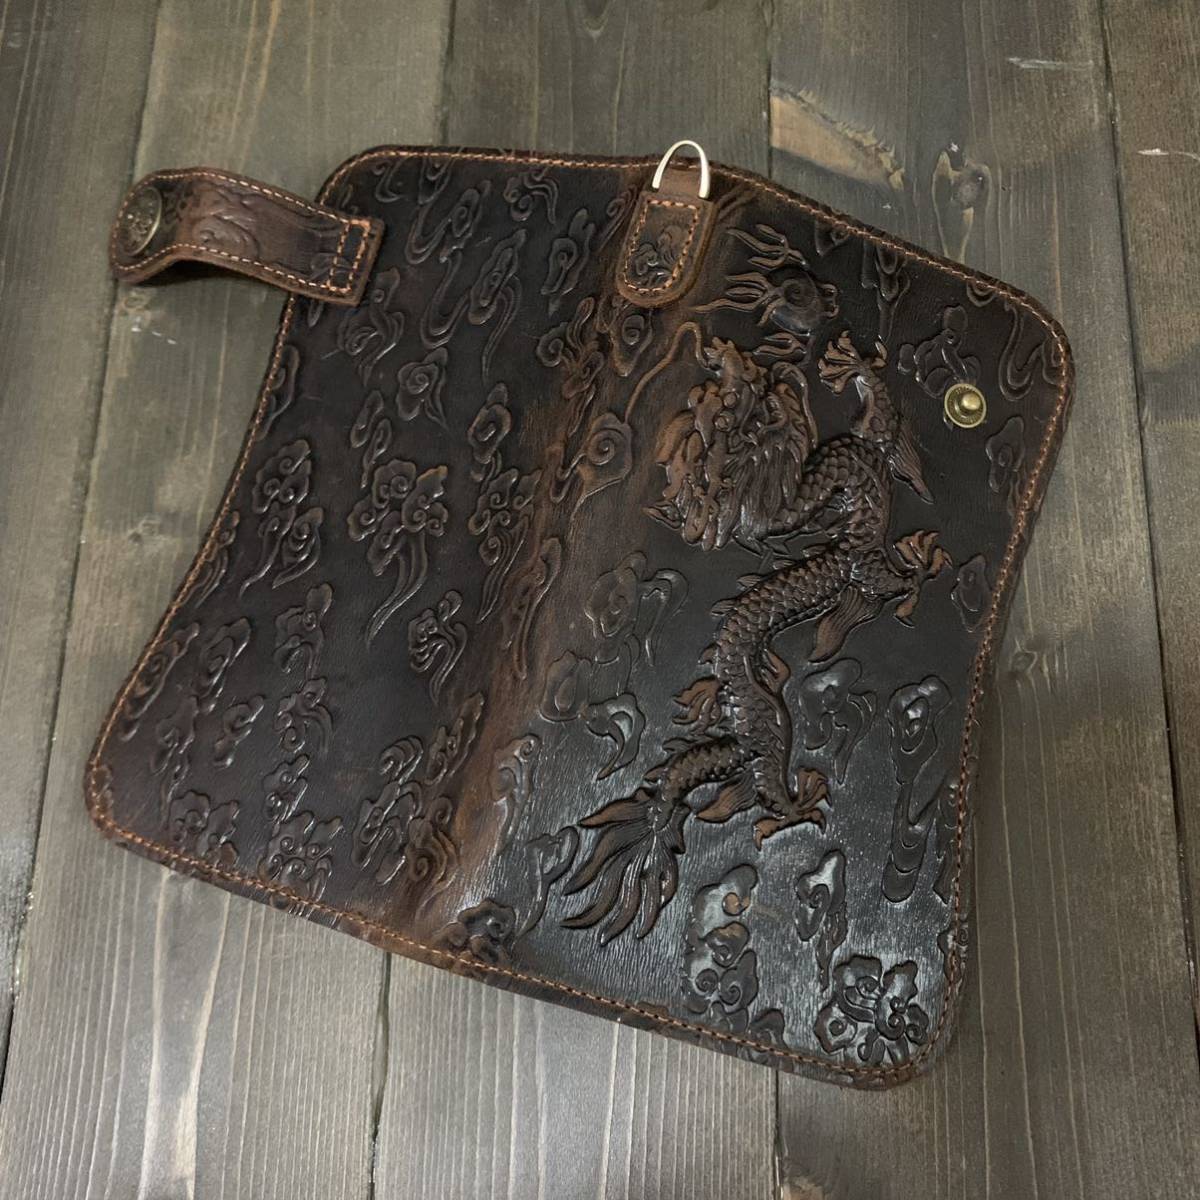  high class cow original leather # Carving Biker z wallet purse #k Lazy hose leather # dragon F Conti . leather long wallet wallet chain attaching 